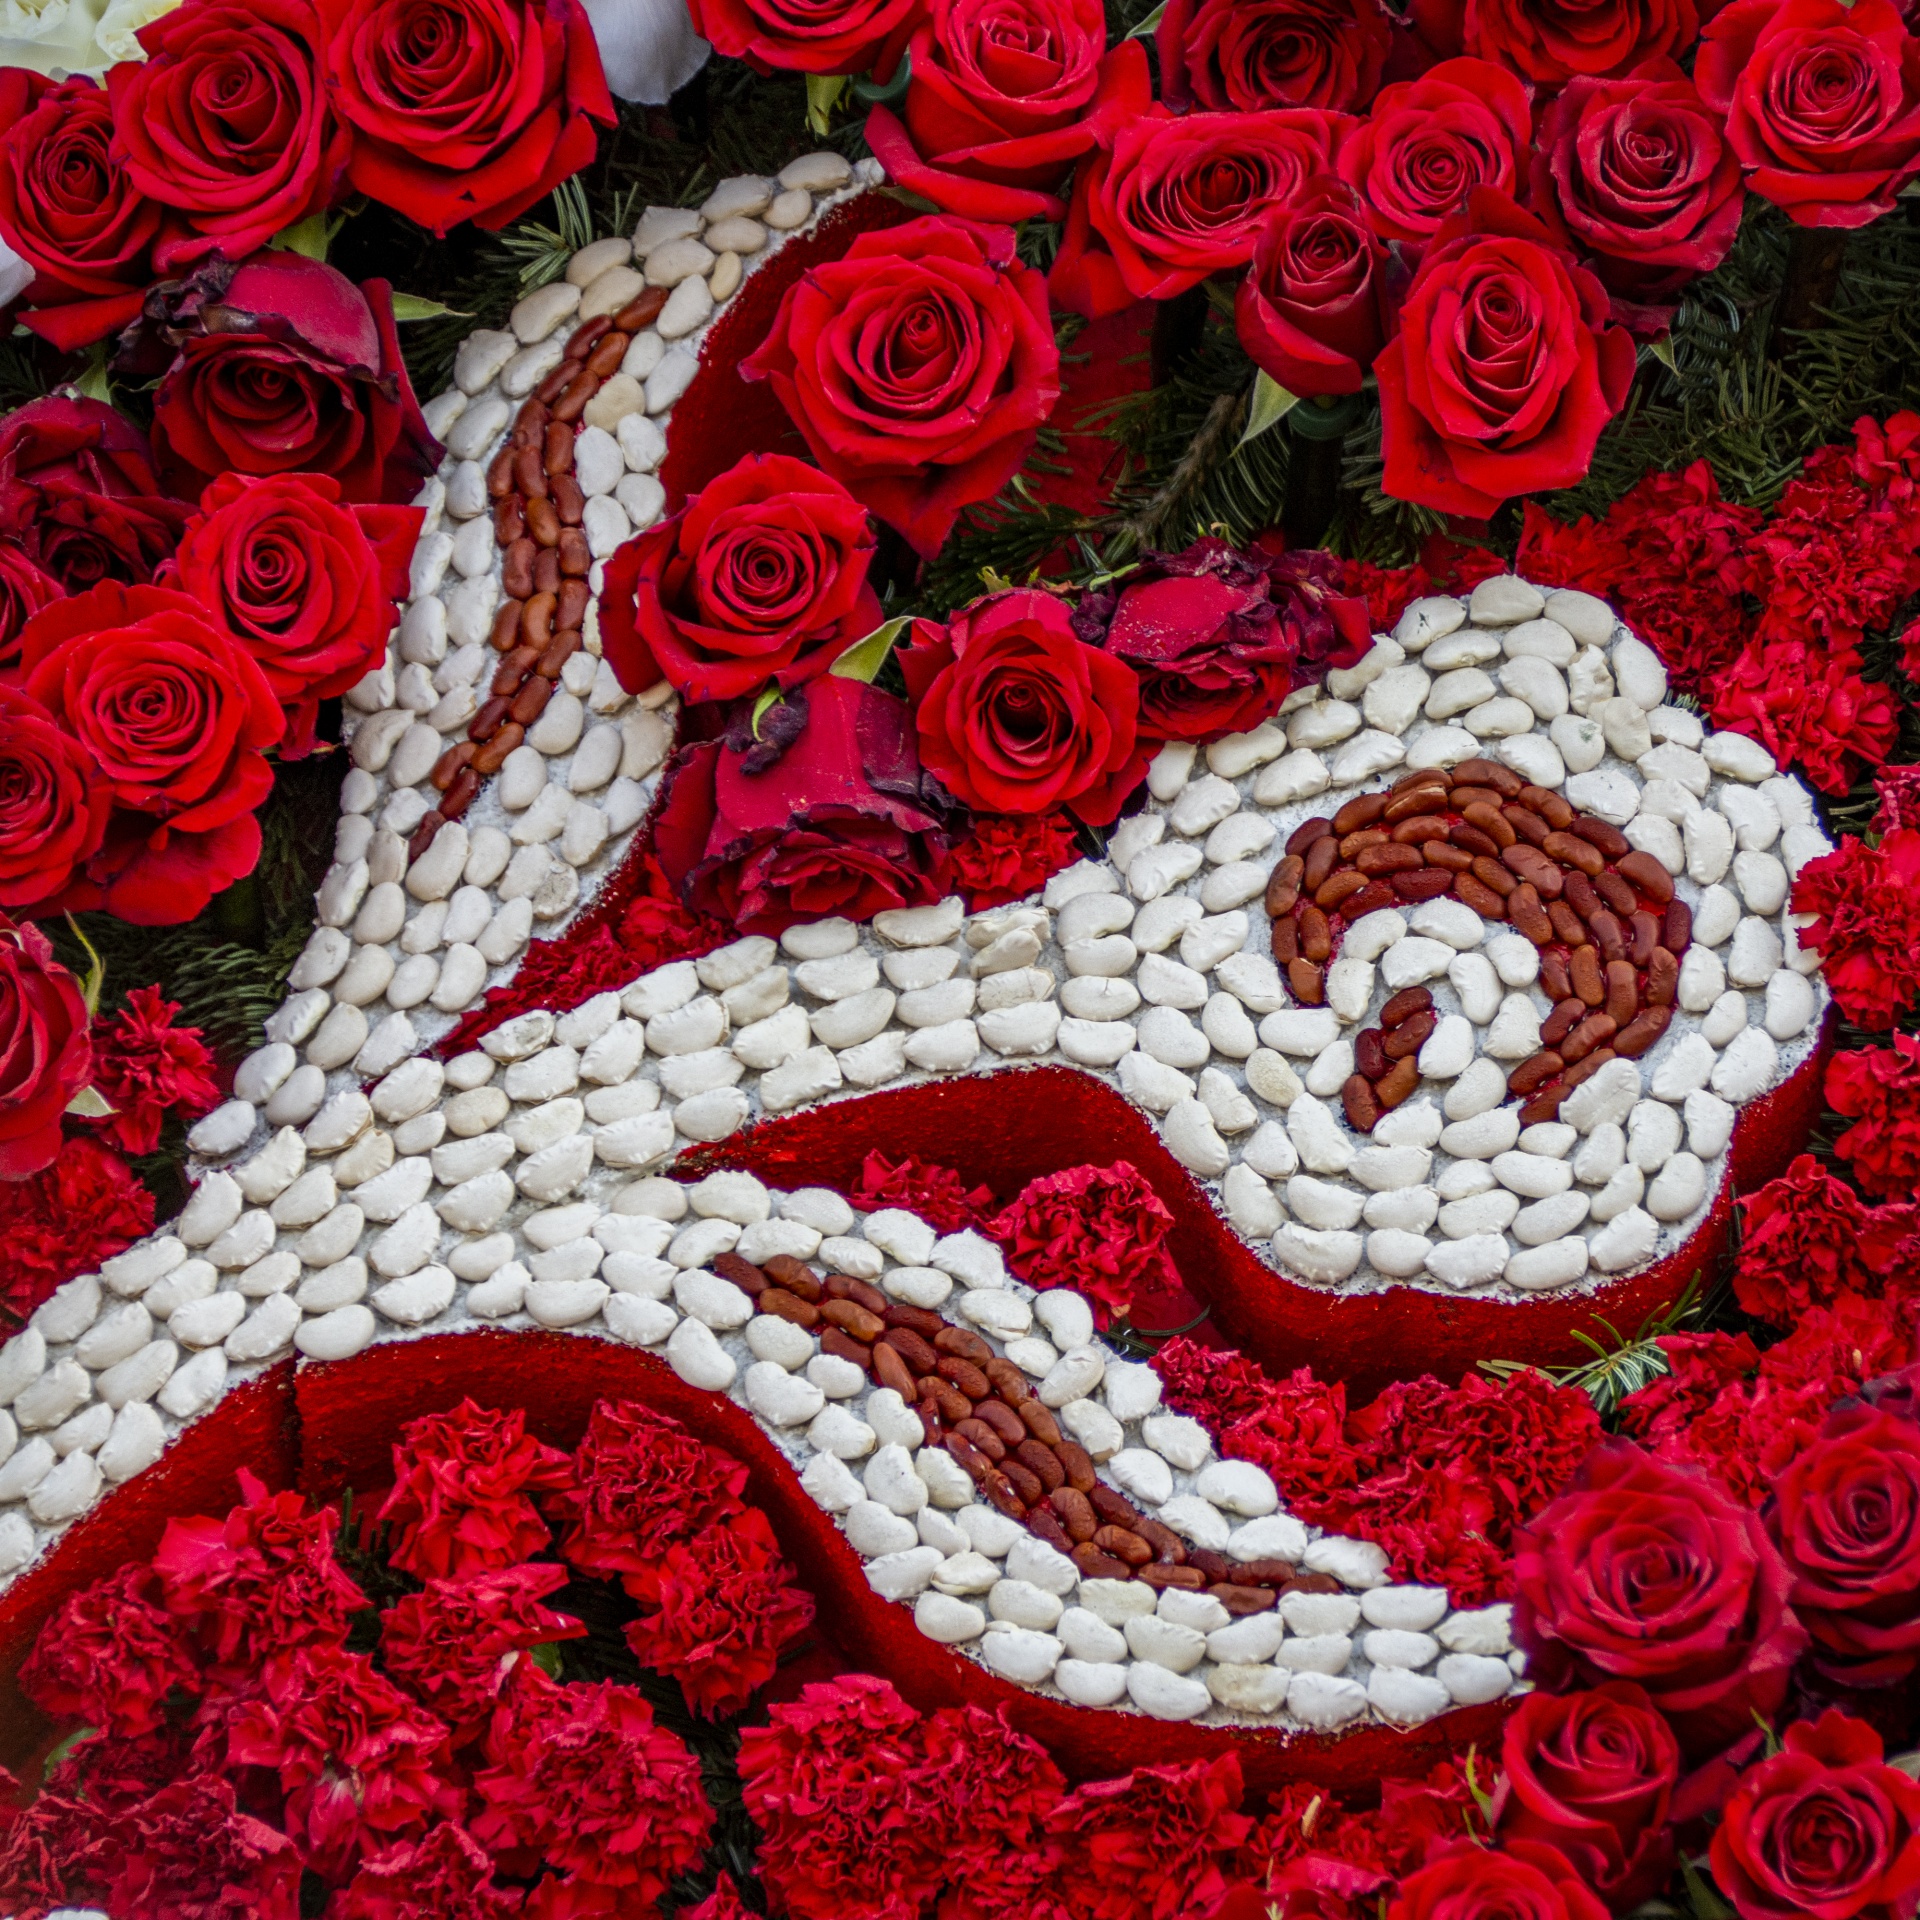 red roses and carnations surround a flower design created with beans